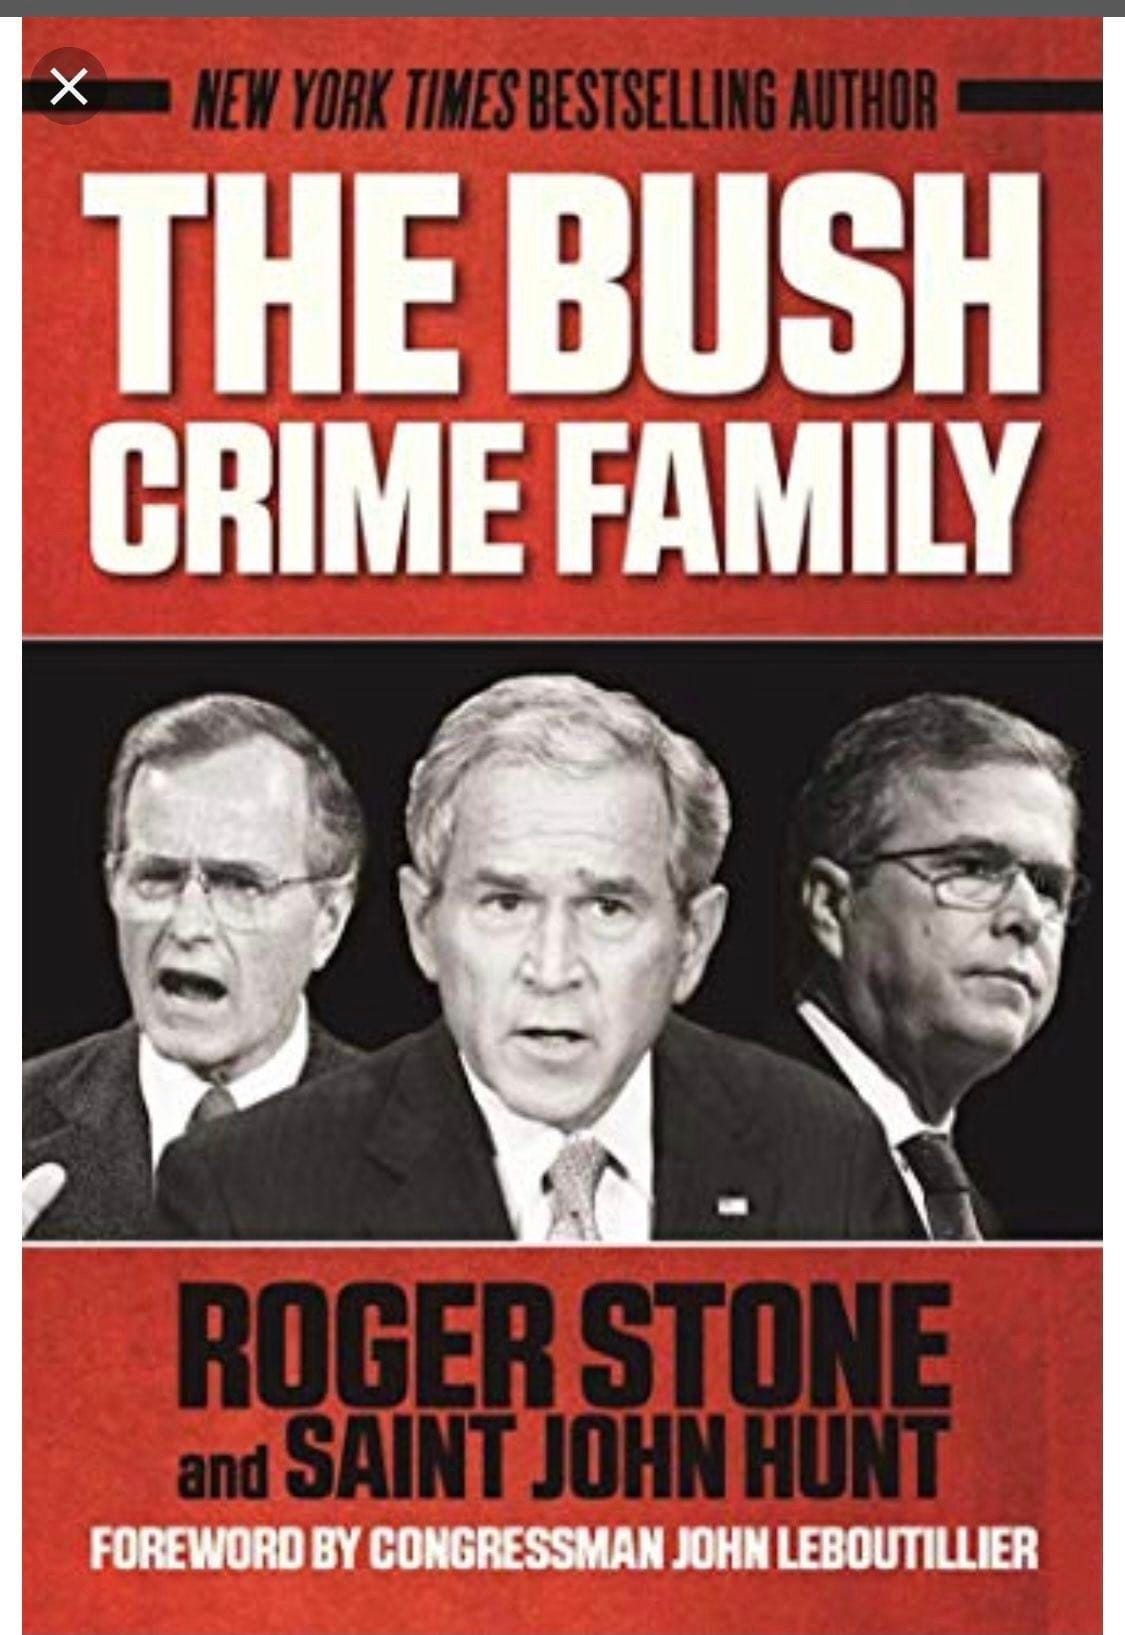 May be an image of 3 people and text that says 'NK THE BUSH CRIME FAMILY ROGERSTONE SAINT JOHNHUNT FOREWORD BY CONGRESSMAN JOHN LEBOUTILLIER'